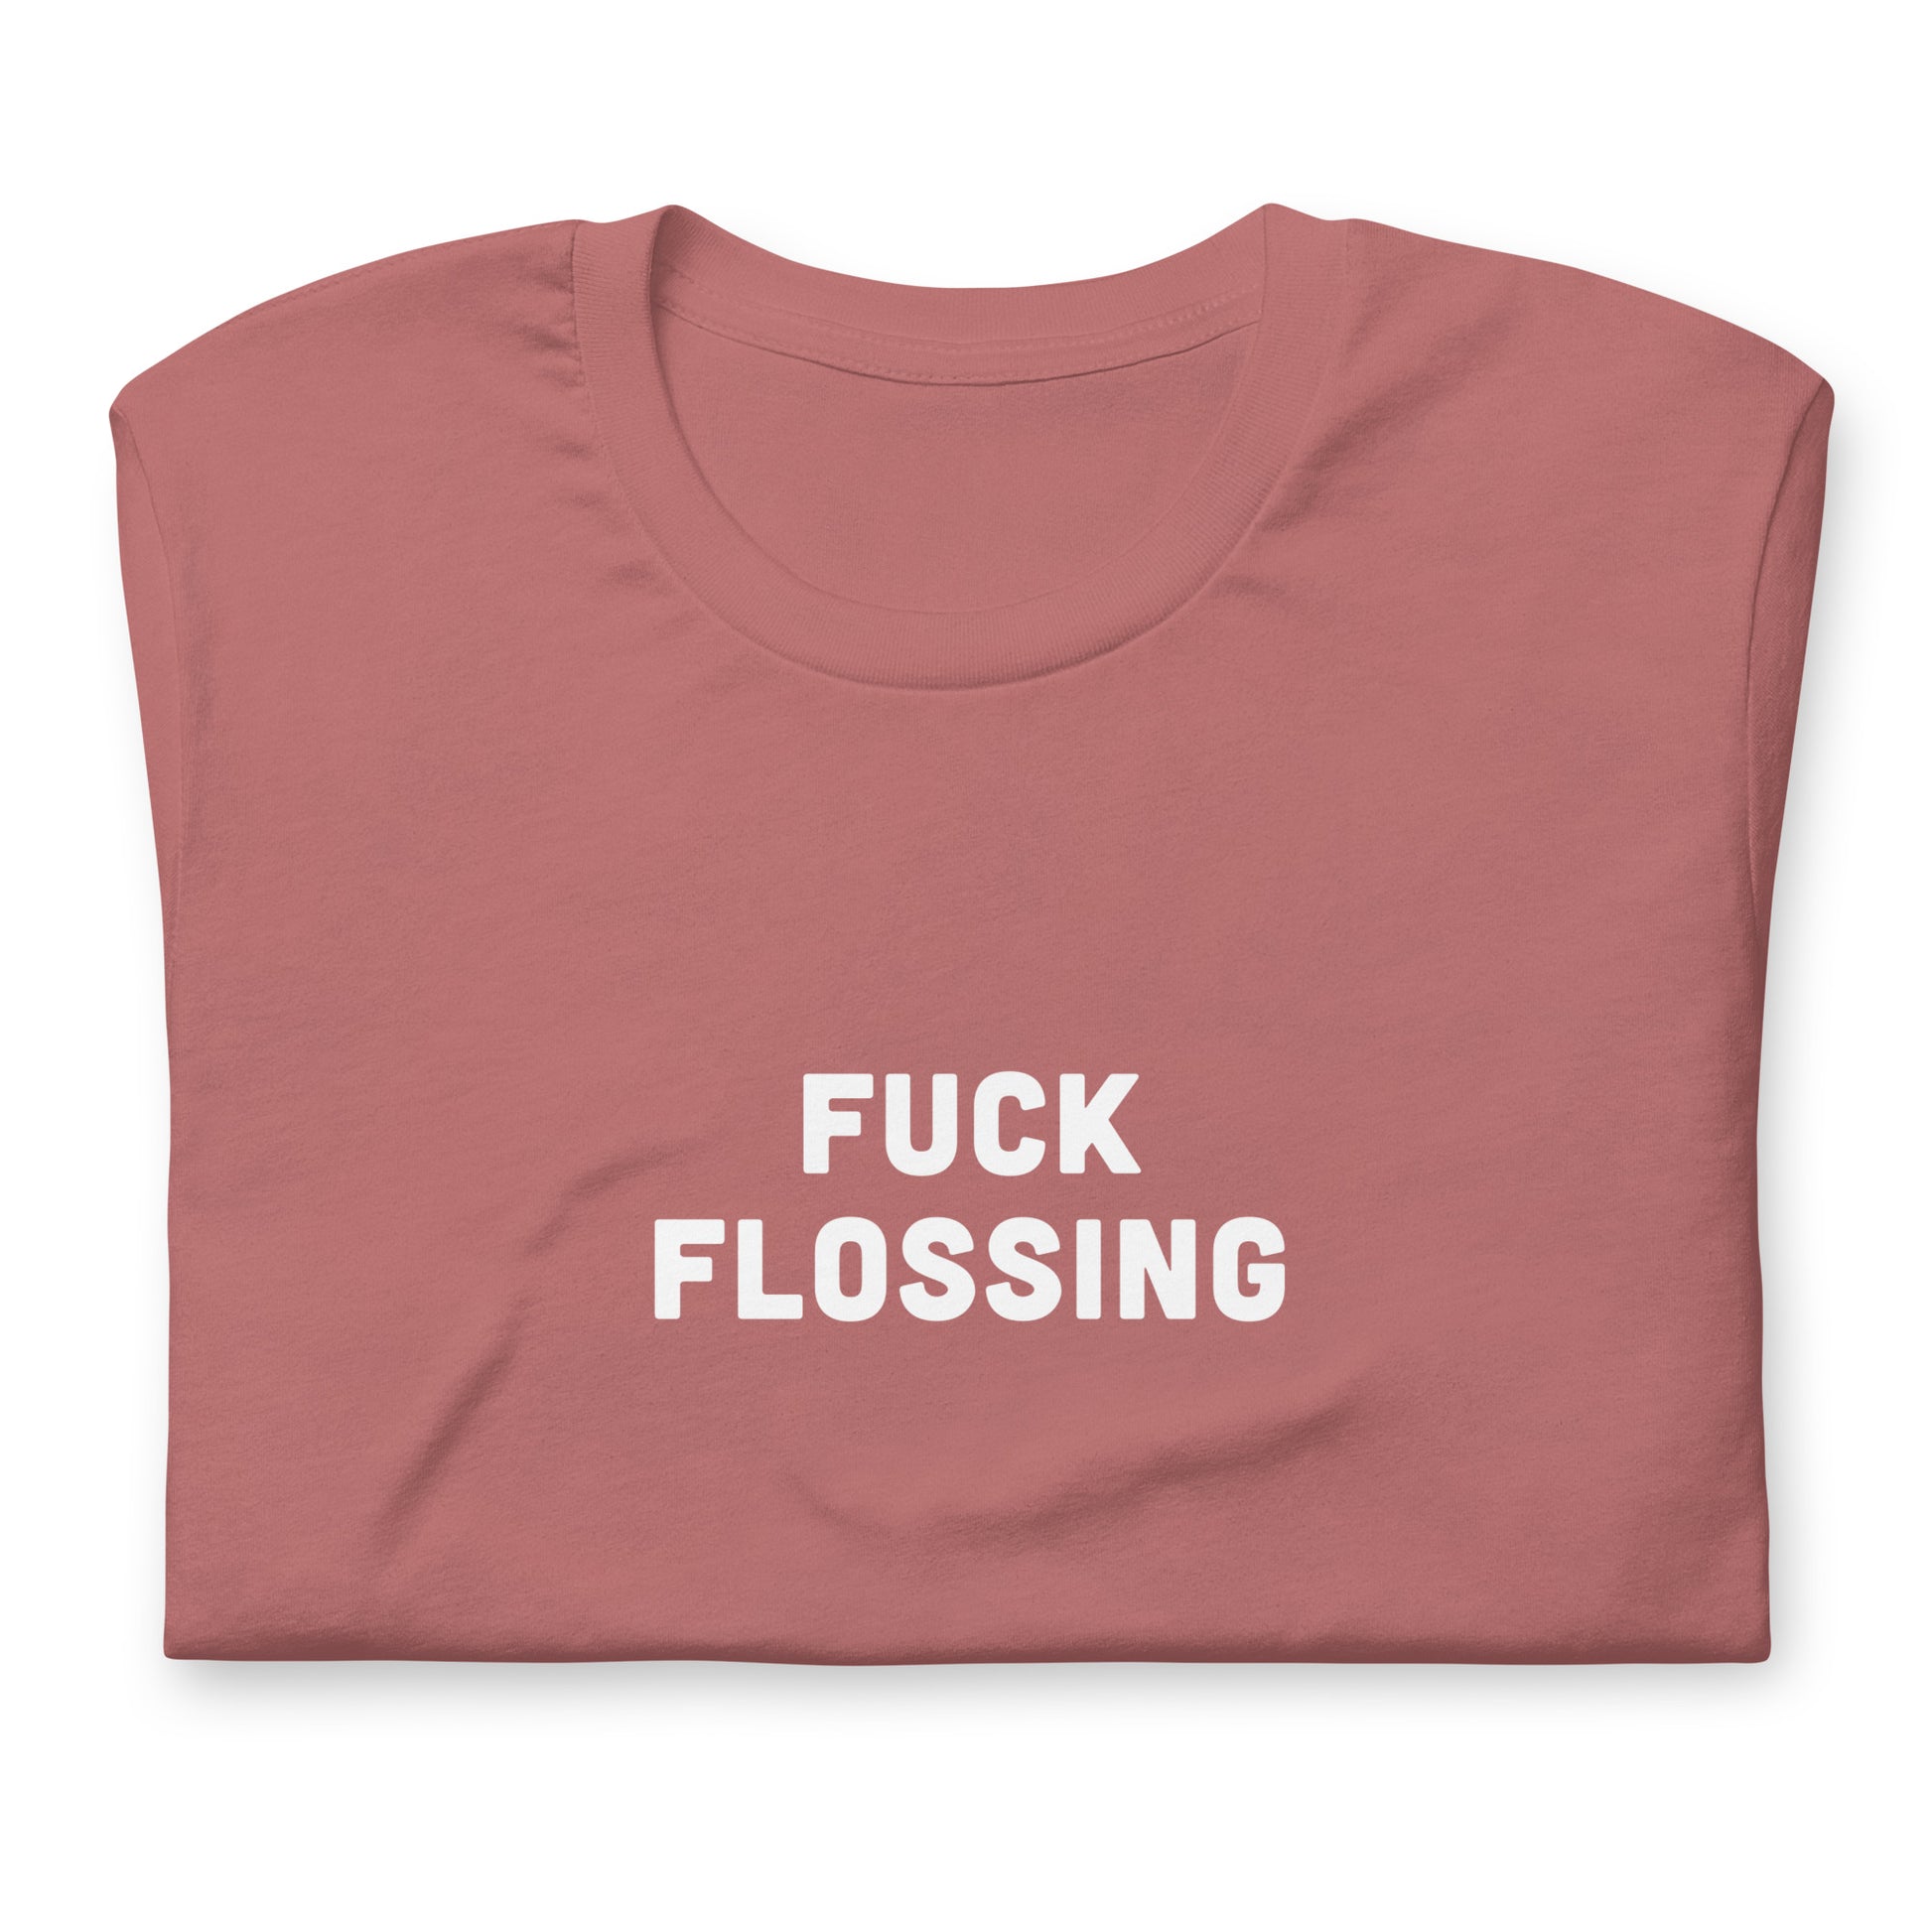 Fuck Flossing T-Shirt Size XL Color Navy